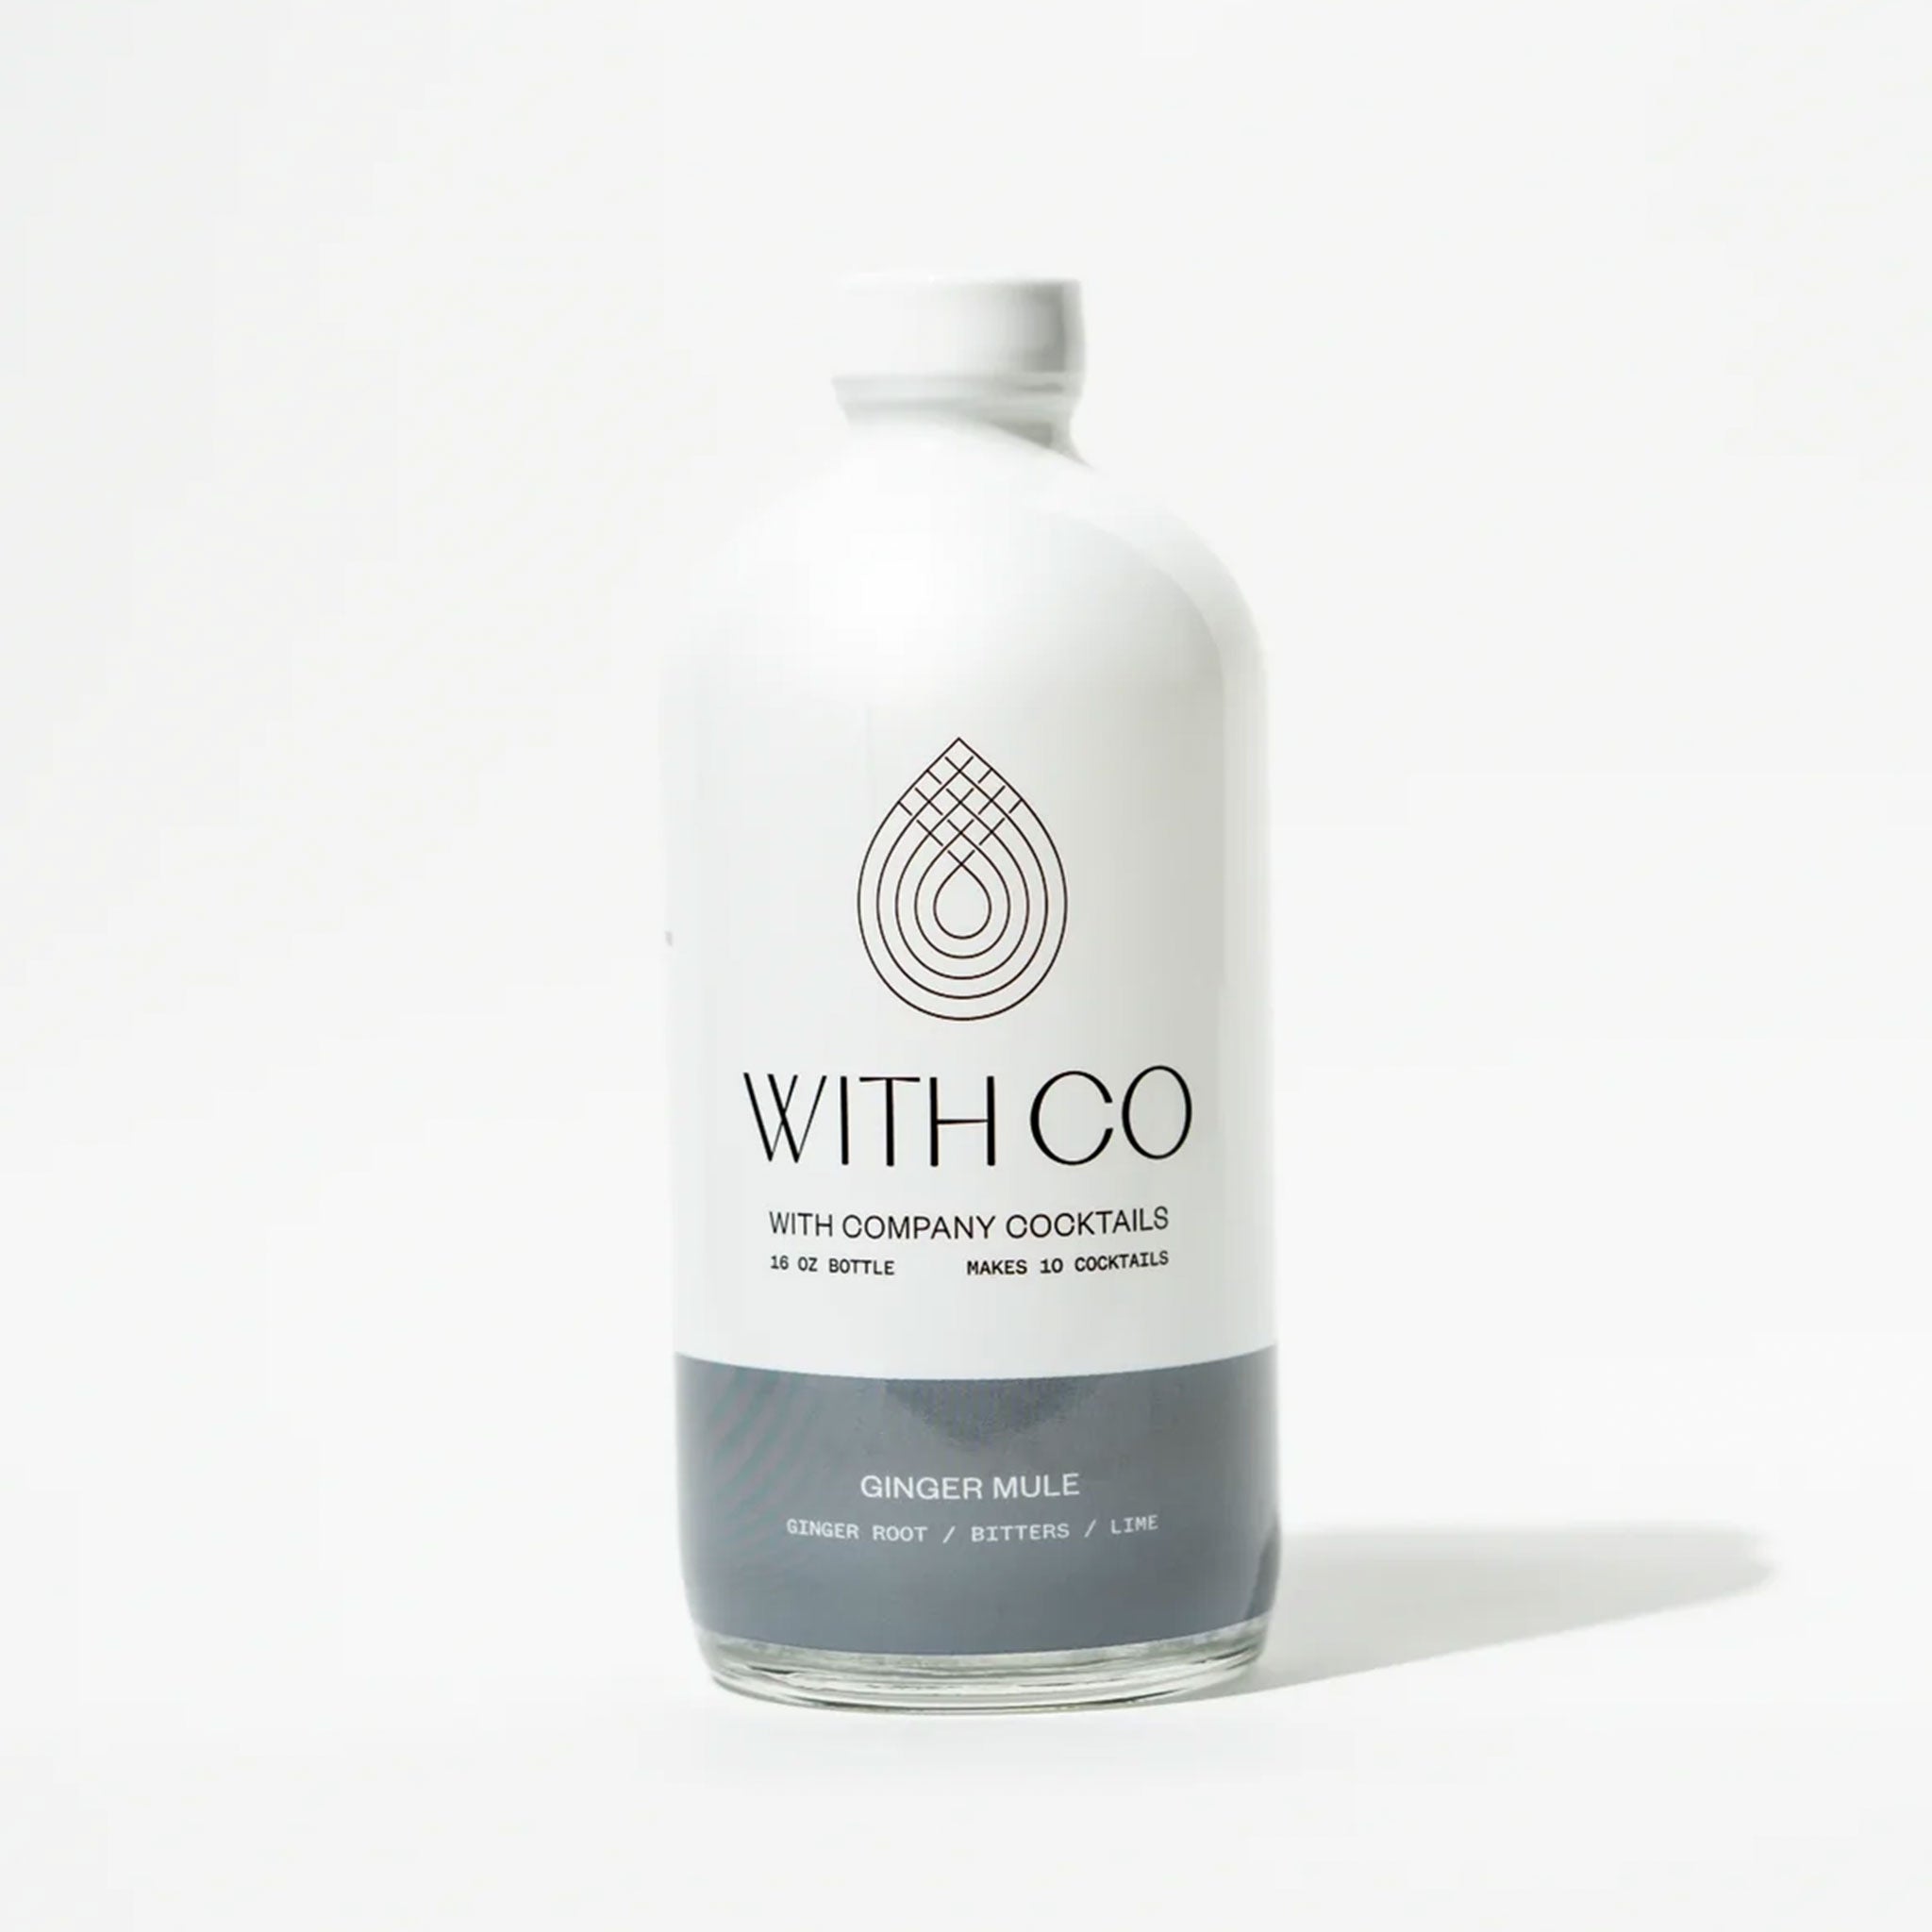 A white bottle of ginger mule cocktail mix with a grey bottom half and the brand &quot;With Co&quot; in black text across the center of the bottle.